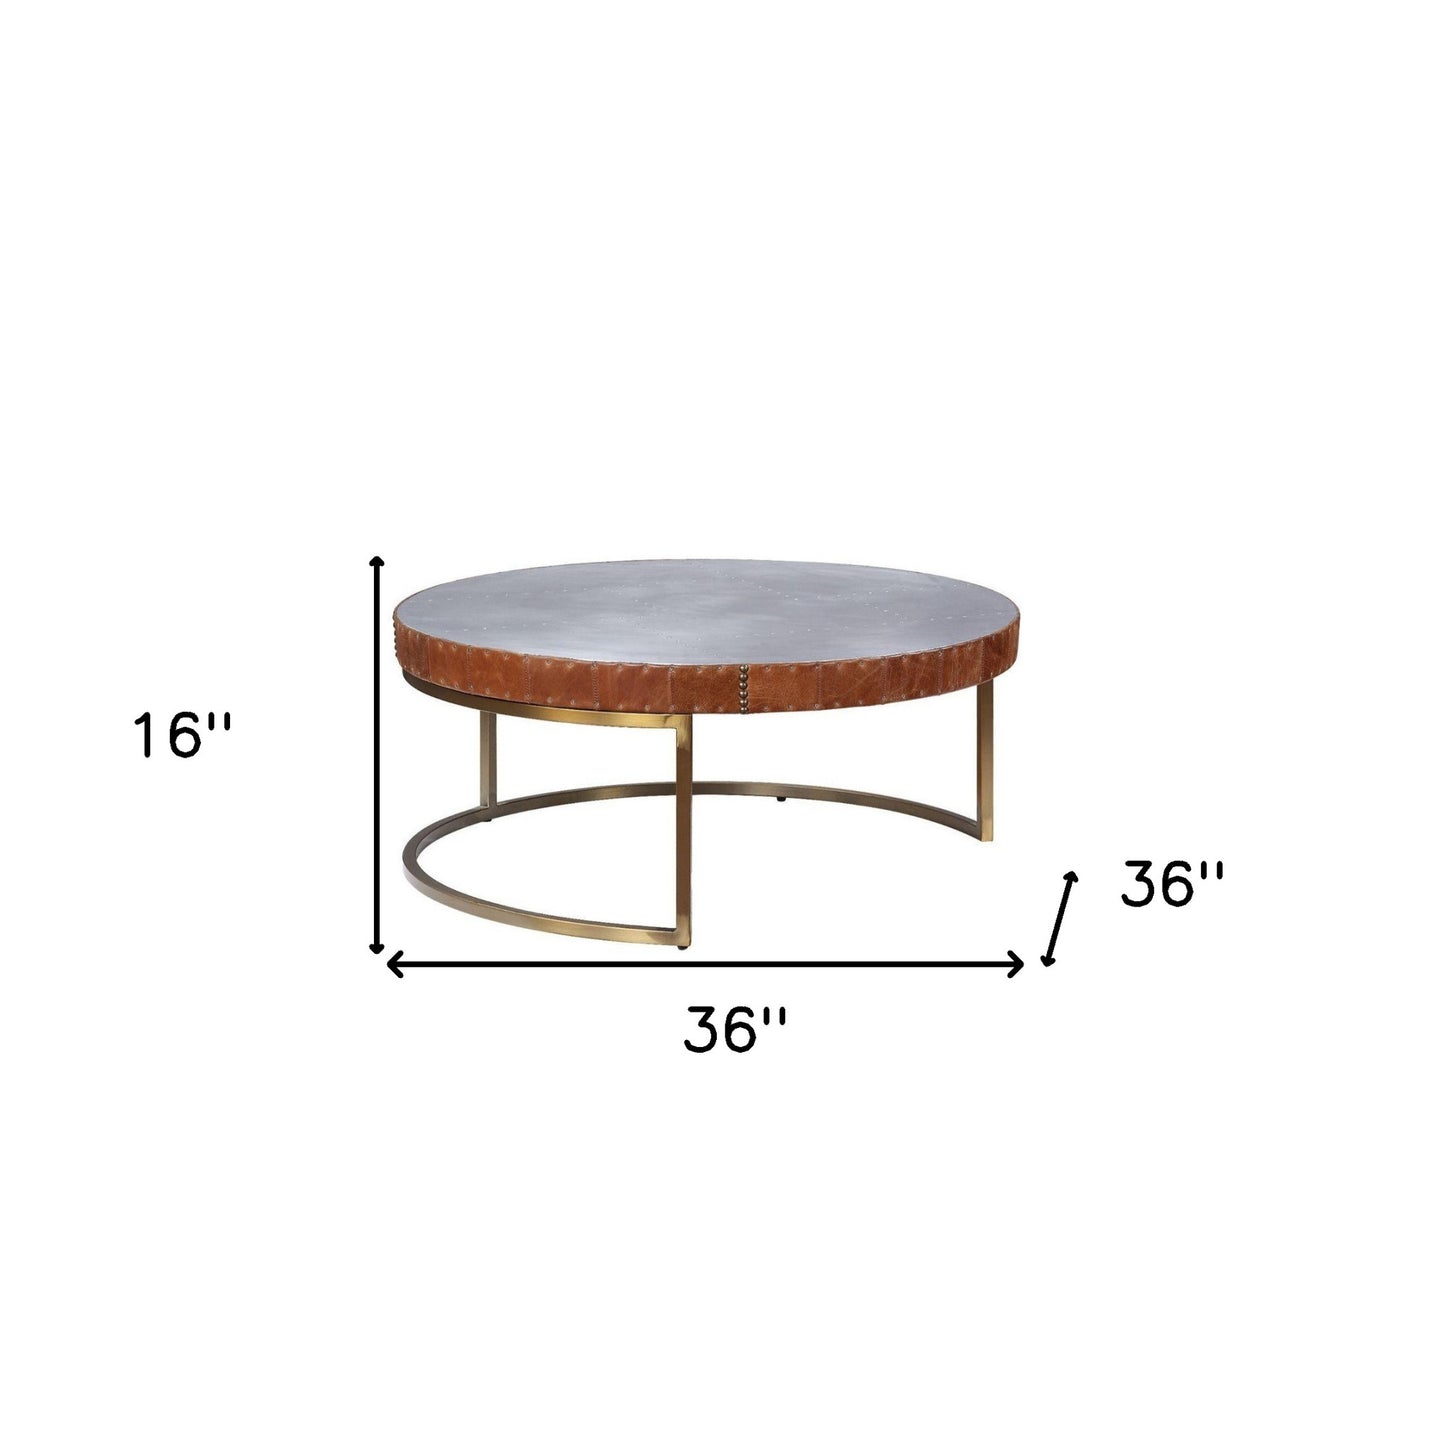 36" Silver And Cocoa Aluminum Round Coffee Table By Homeroots